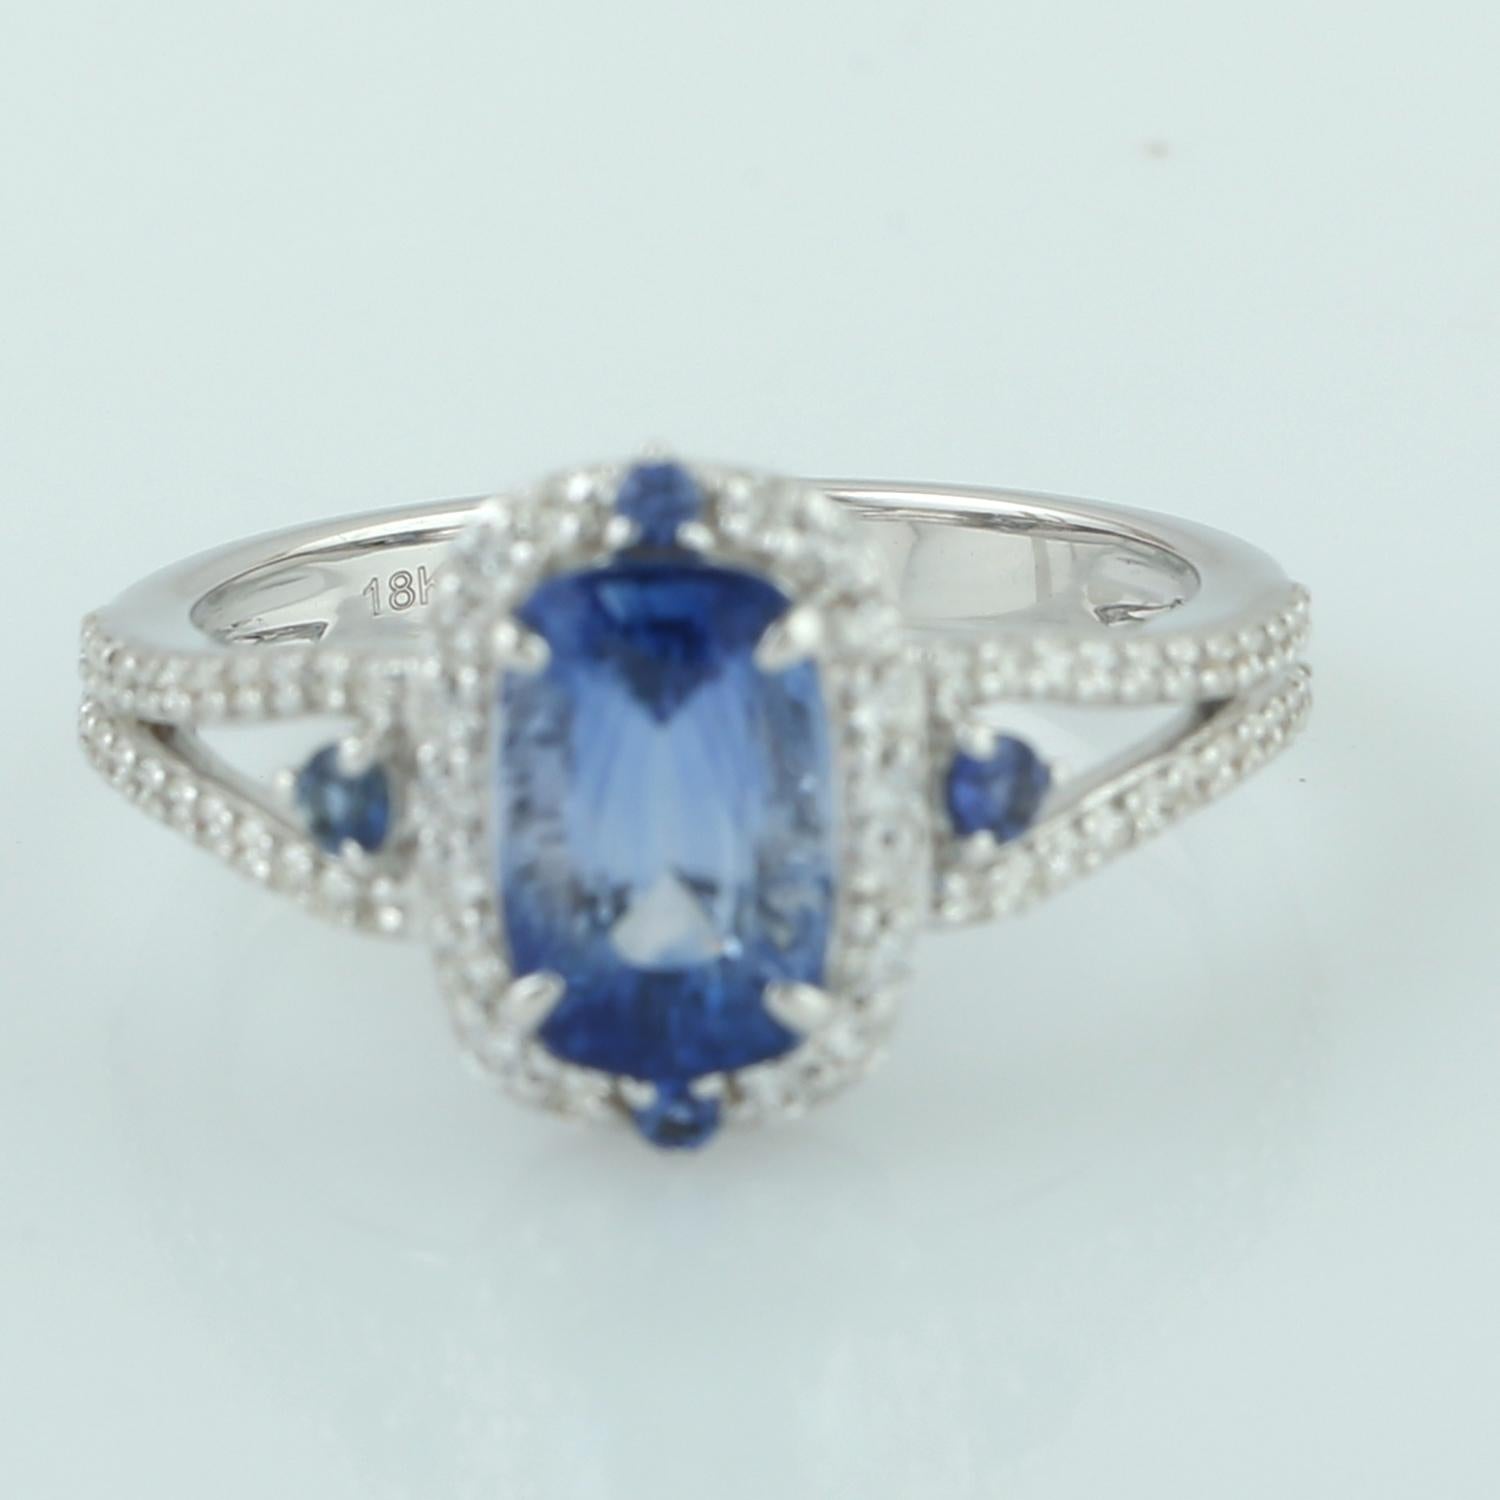 Art Deco Blue Sapphire Cocktail Ring With Pave Diamonds Made In 18k White Gold For Sale